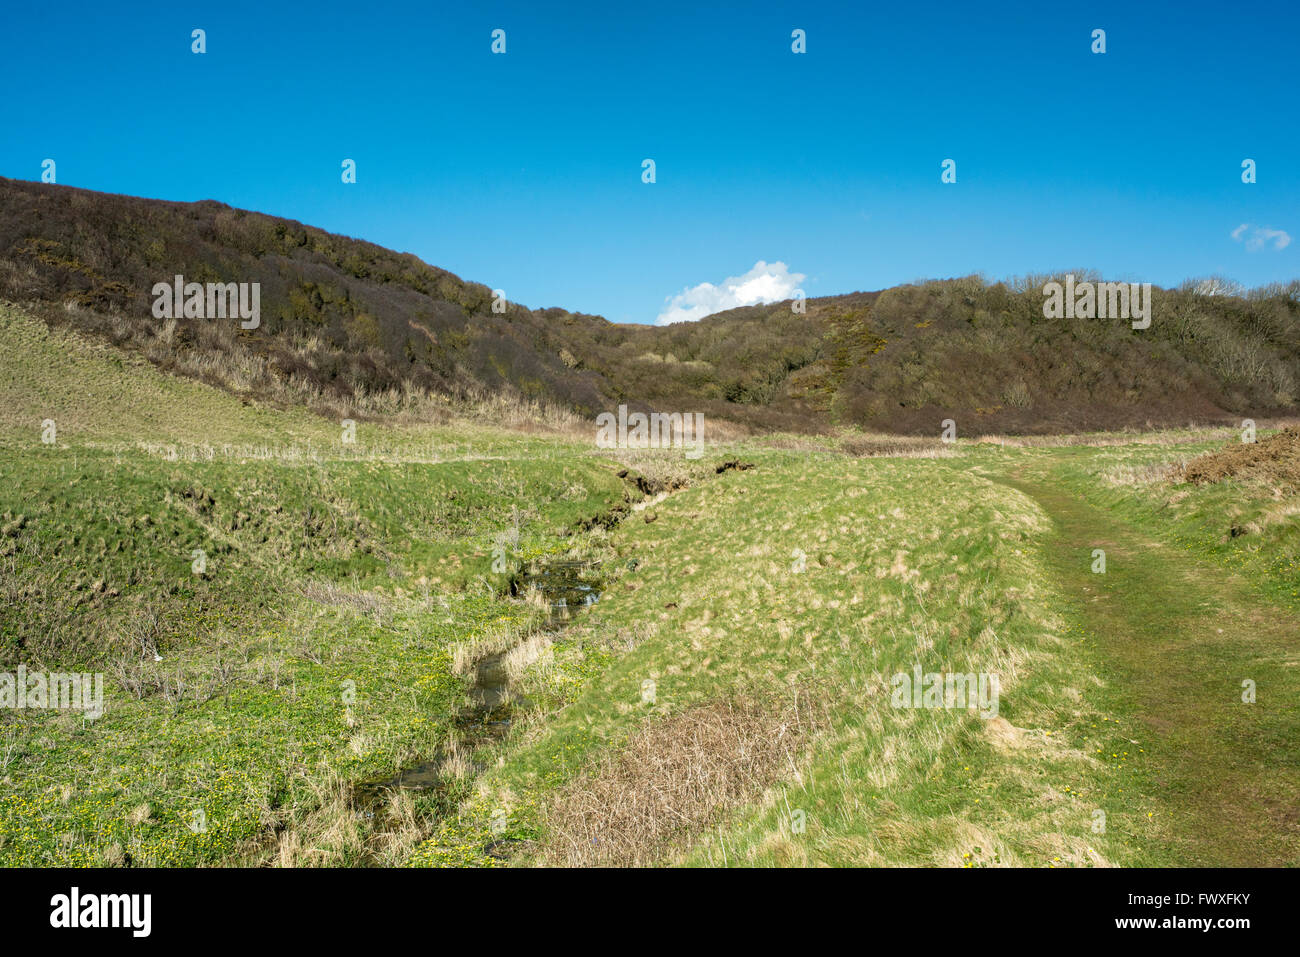 Valley with a brook running through it. Stock Photo